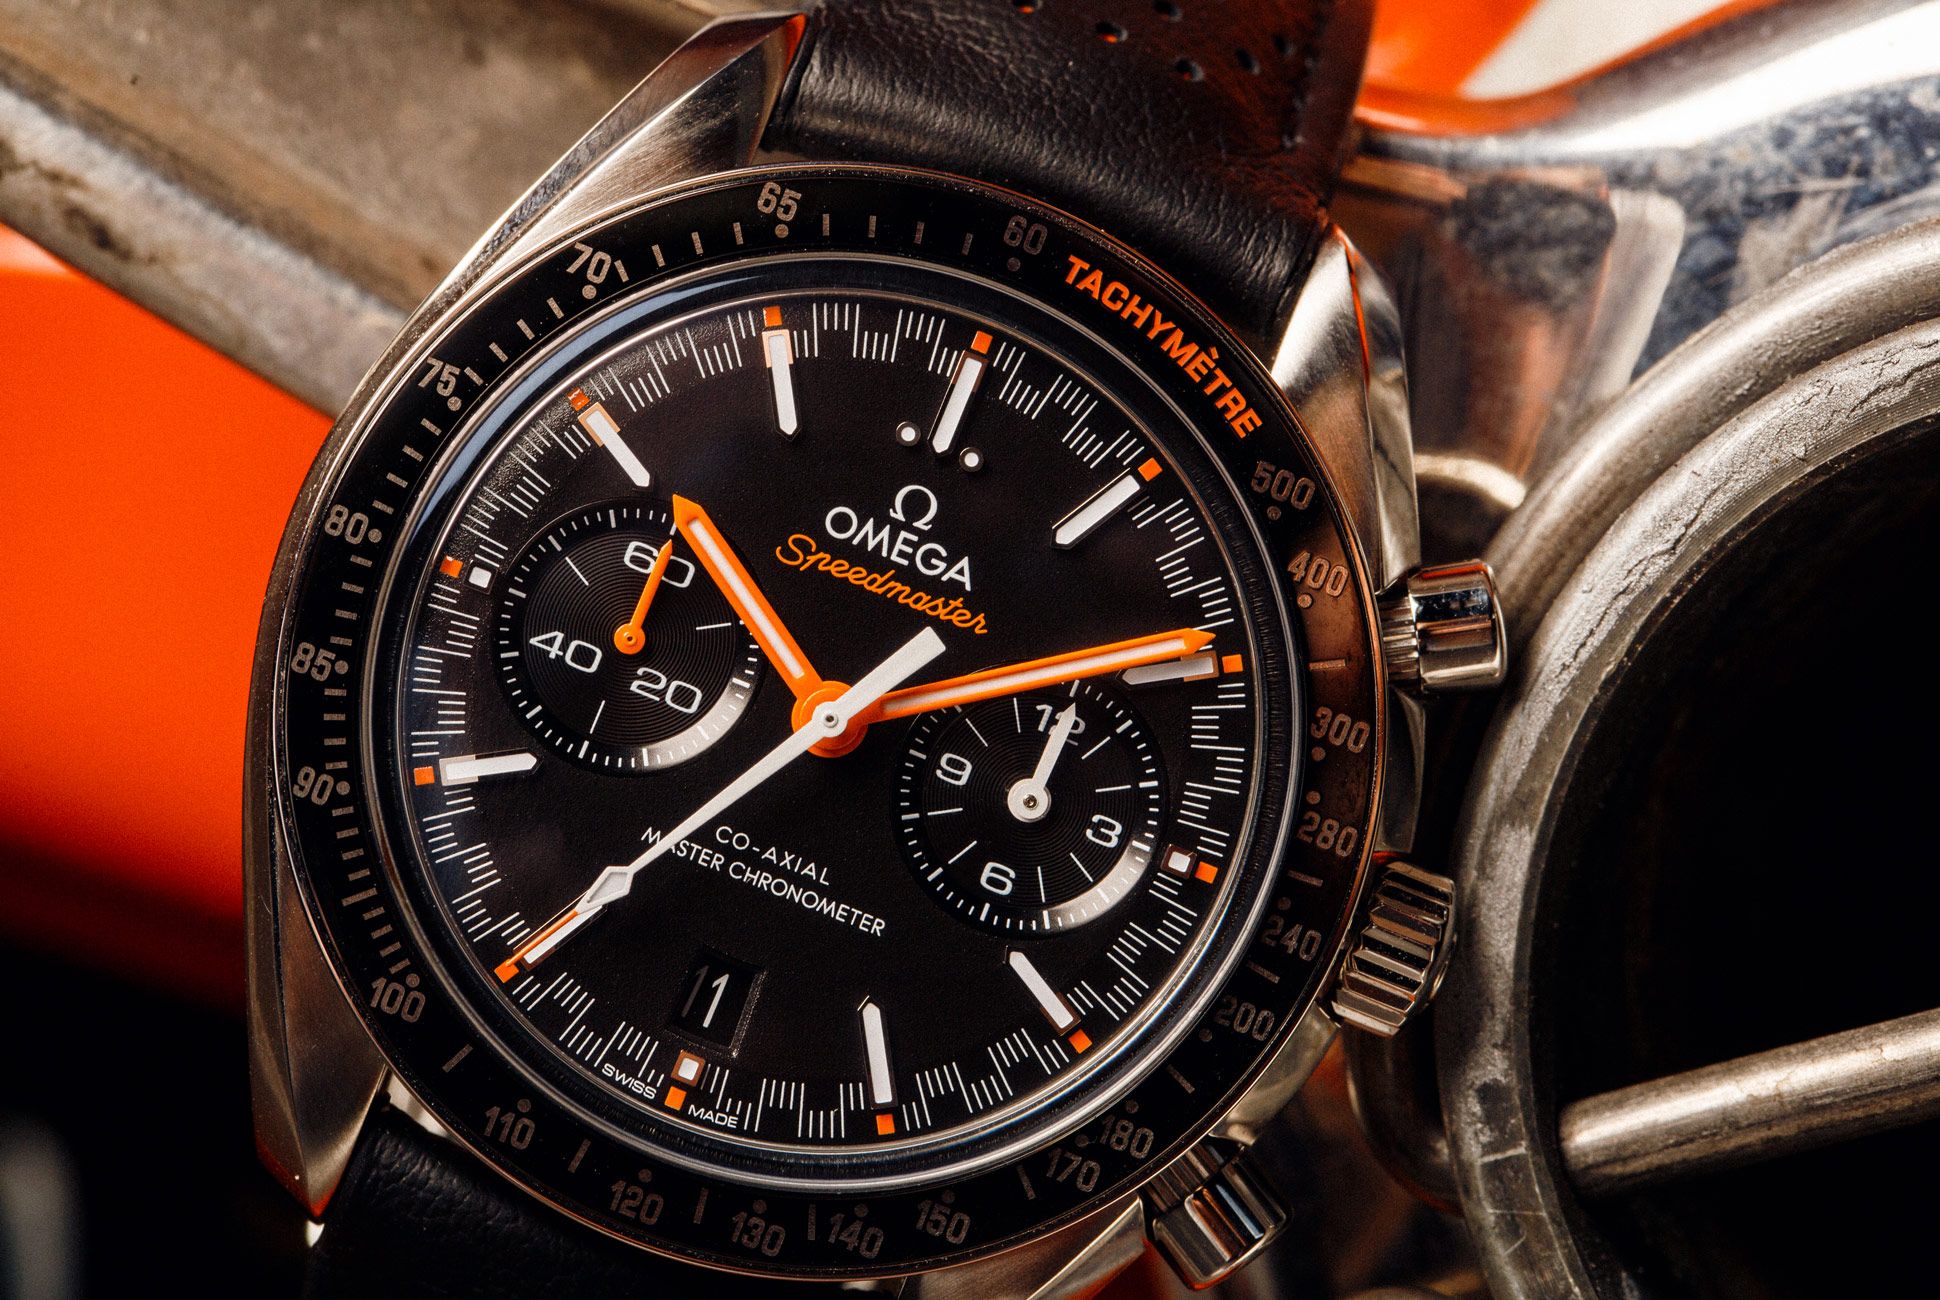 Buying Guide - Six Racing-inspired chronographs for Petrolheads